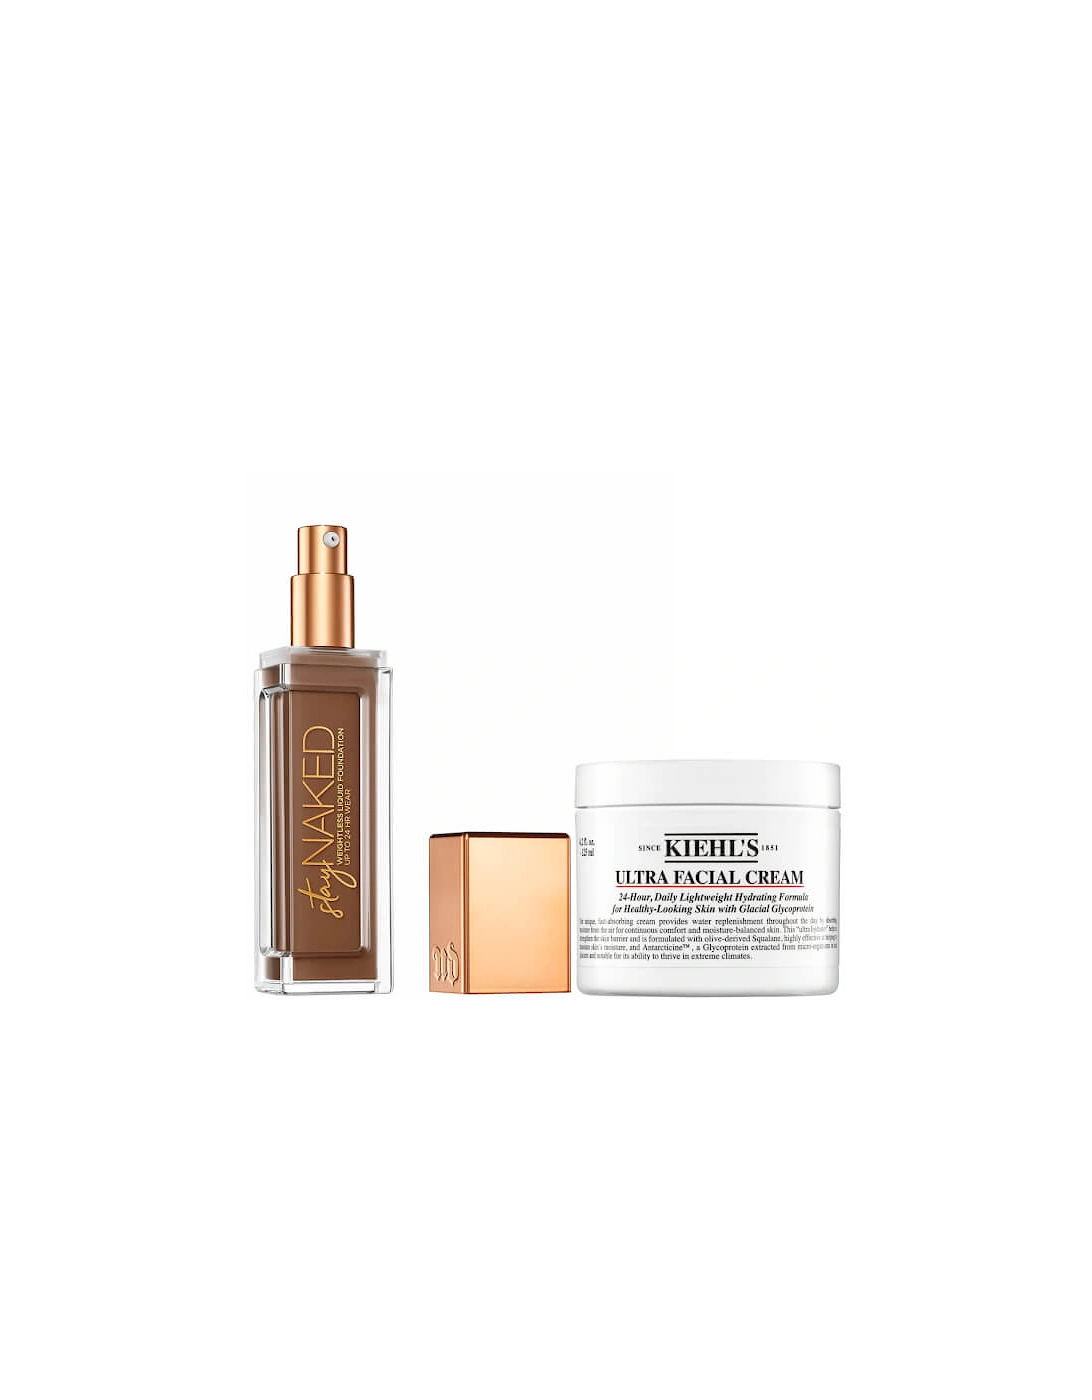 Stay Naked Foundation x Kiehl's Ultra Facial Cream 50ml Bundle - 80WY, 2 of 1